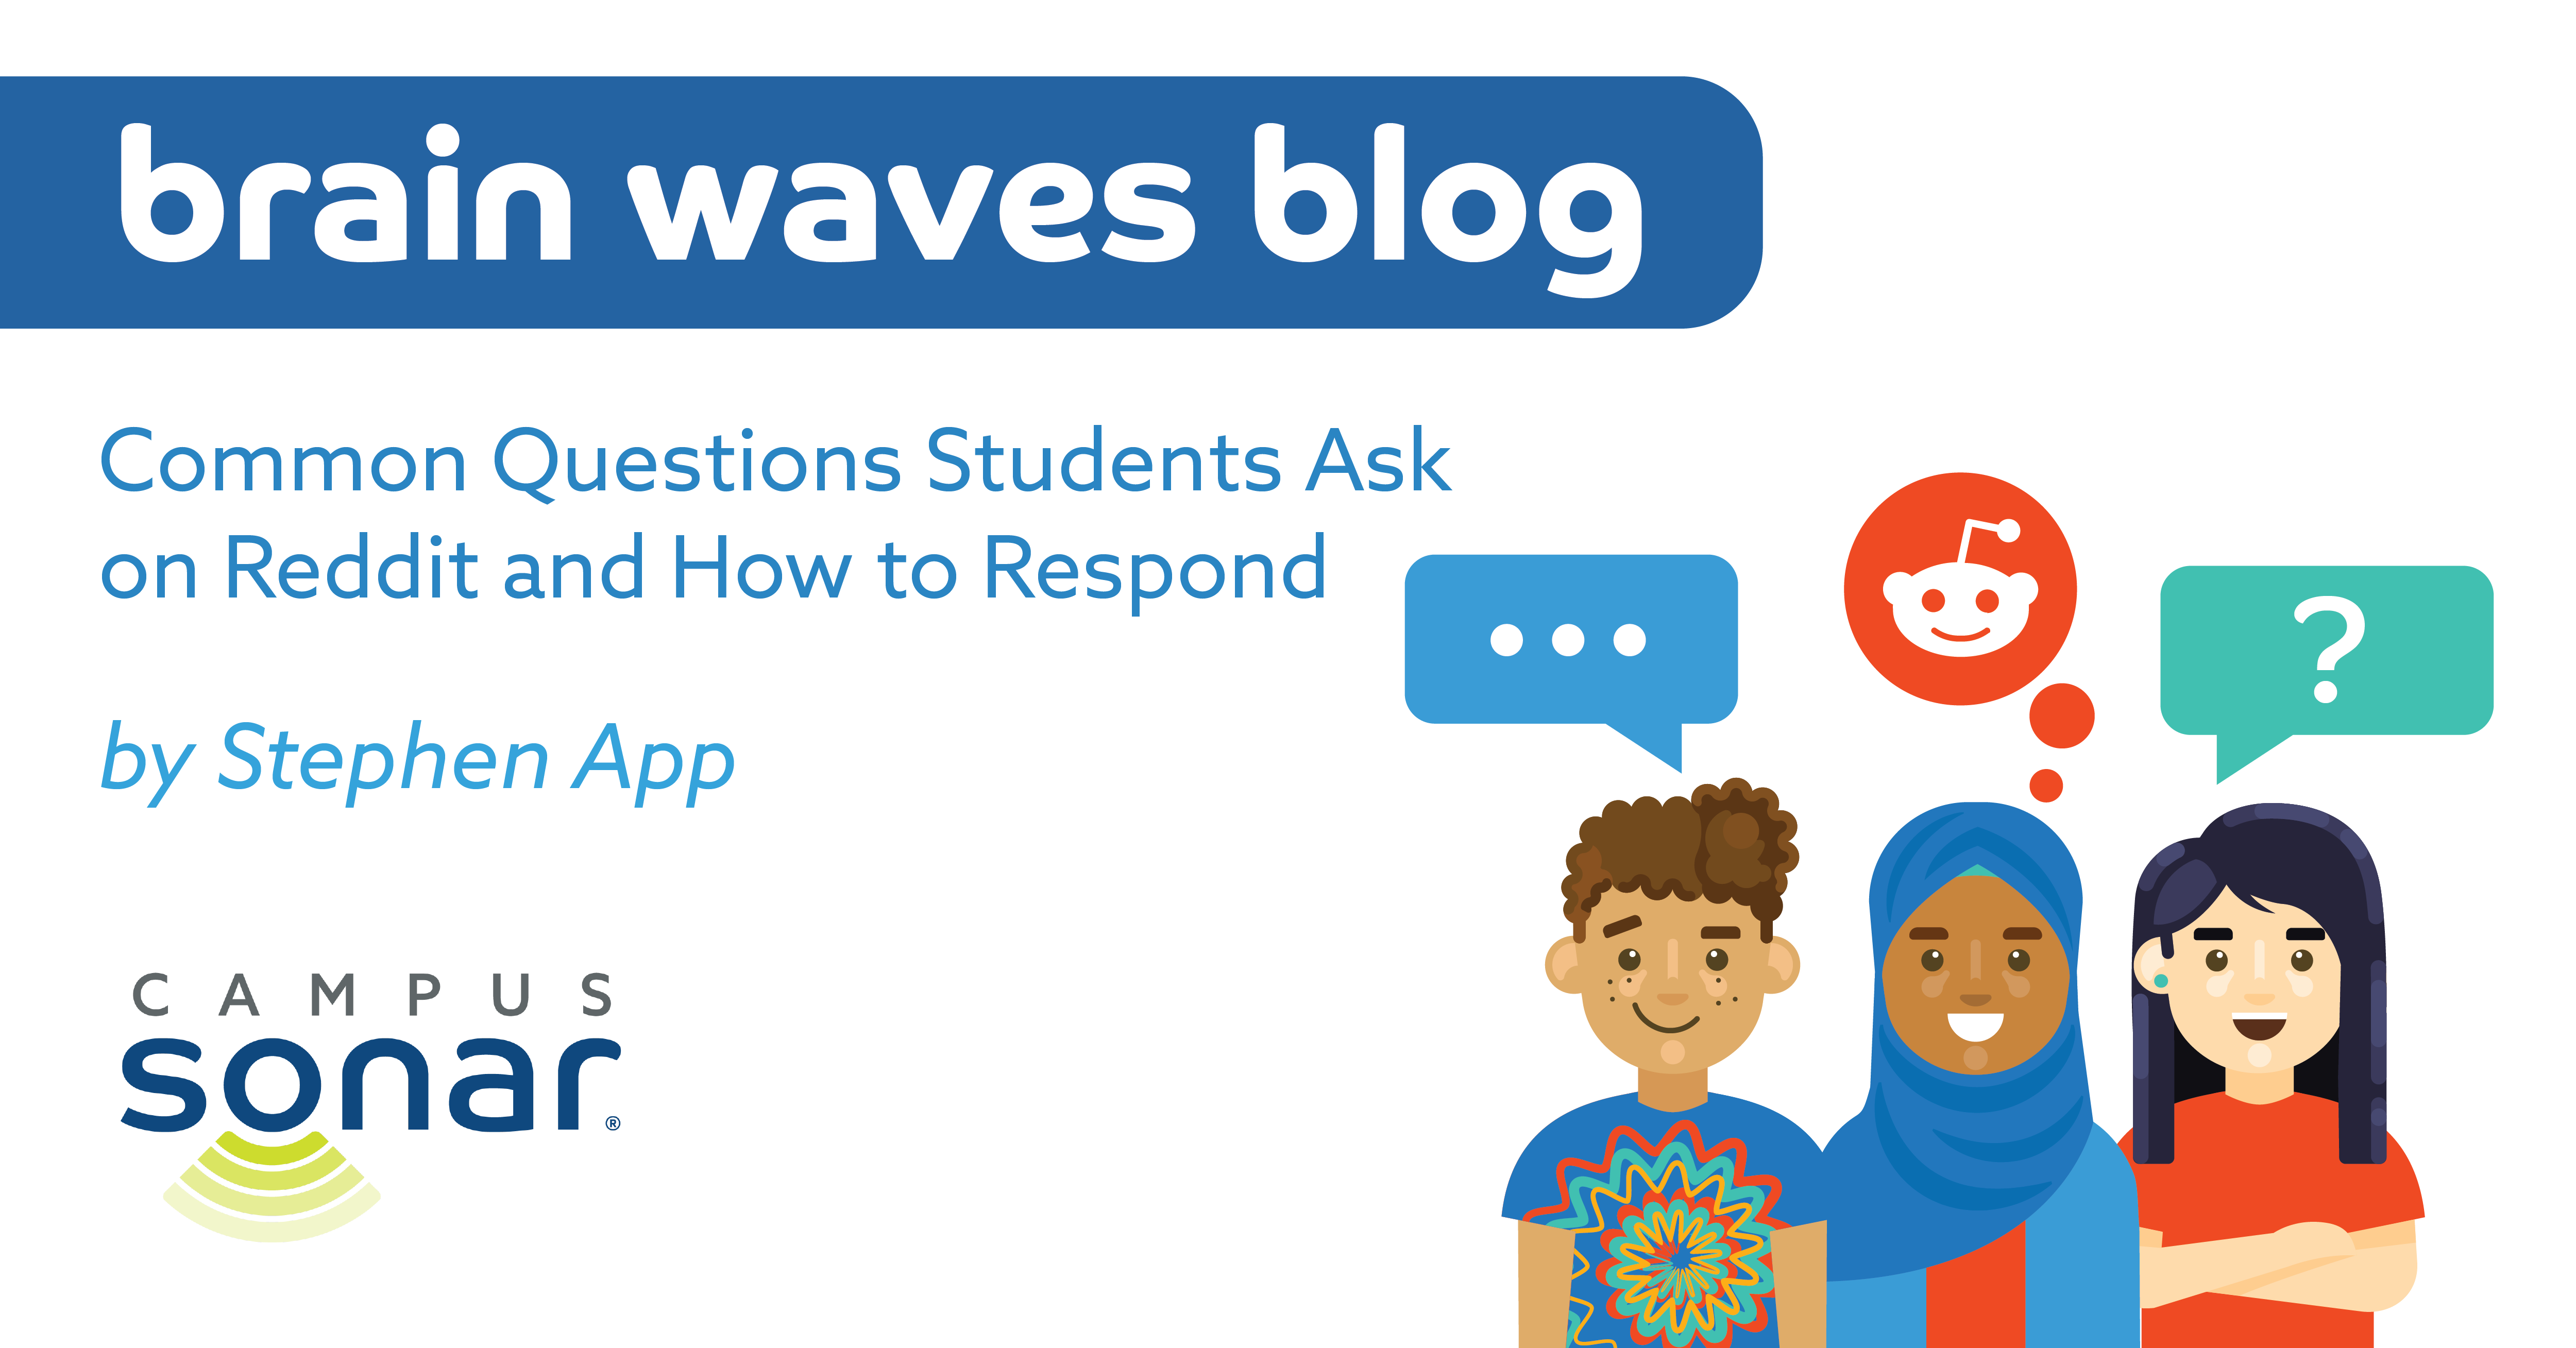 Brain Waves Blog: Common Questions Students Ask on Reddit and How to Respond